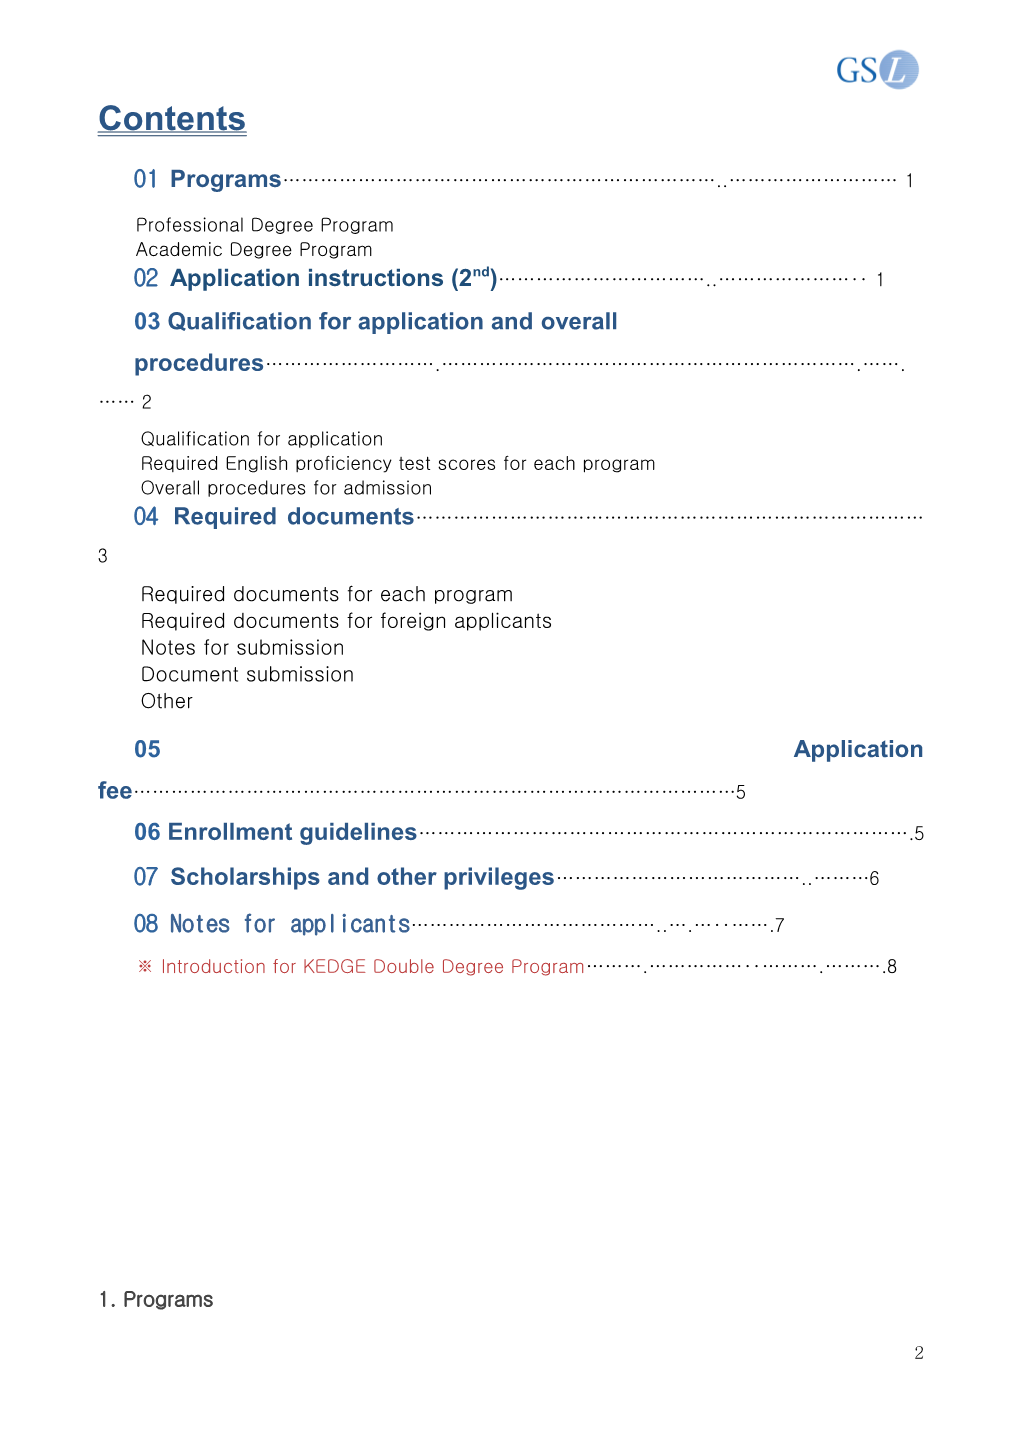 03Qualification for Application and Overall